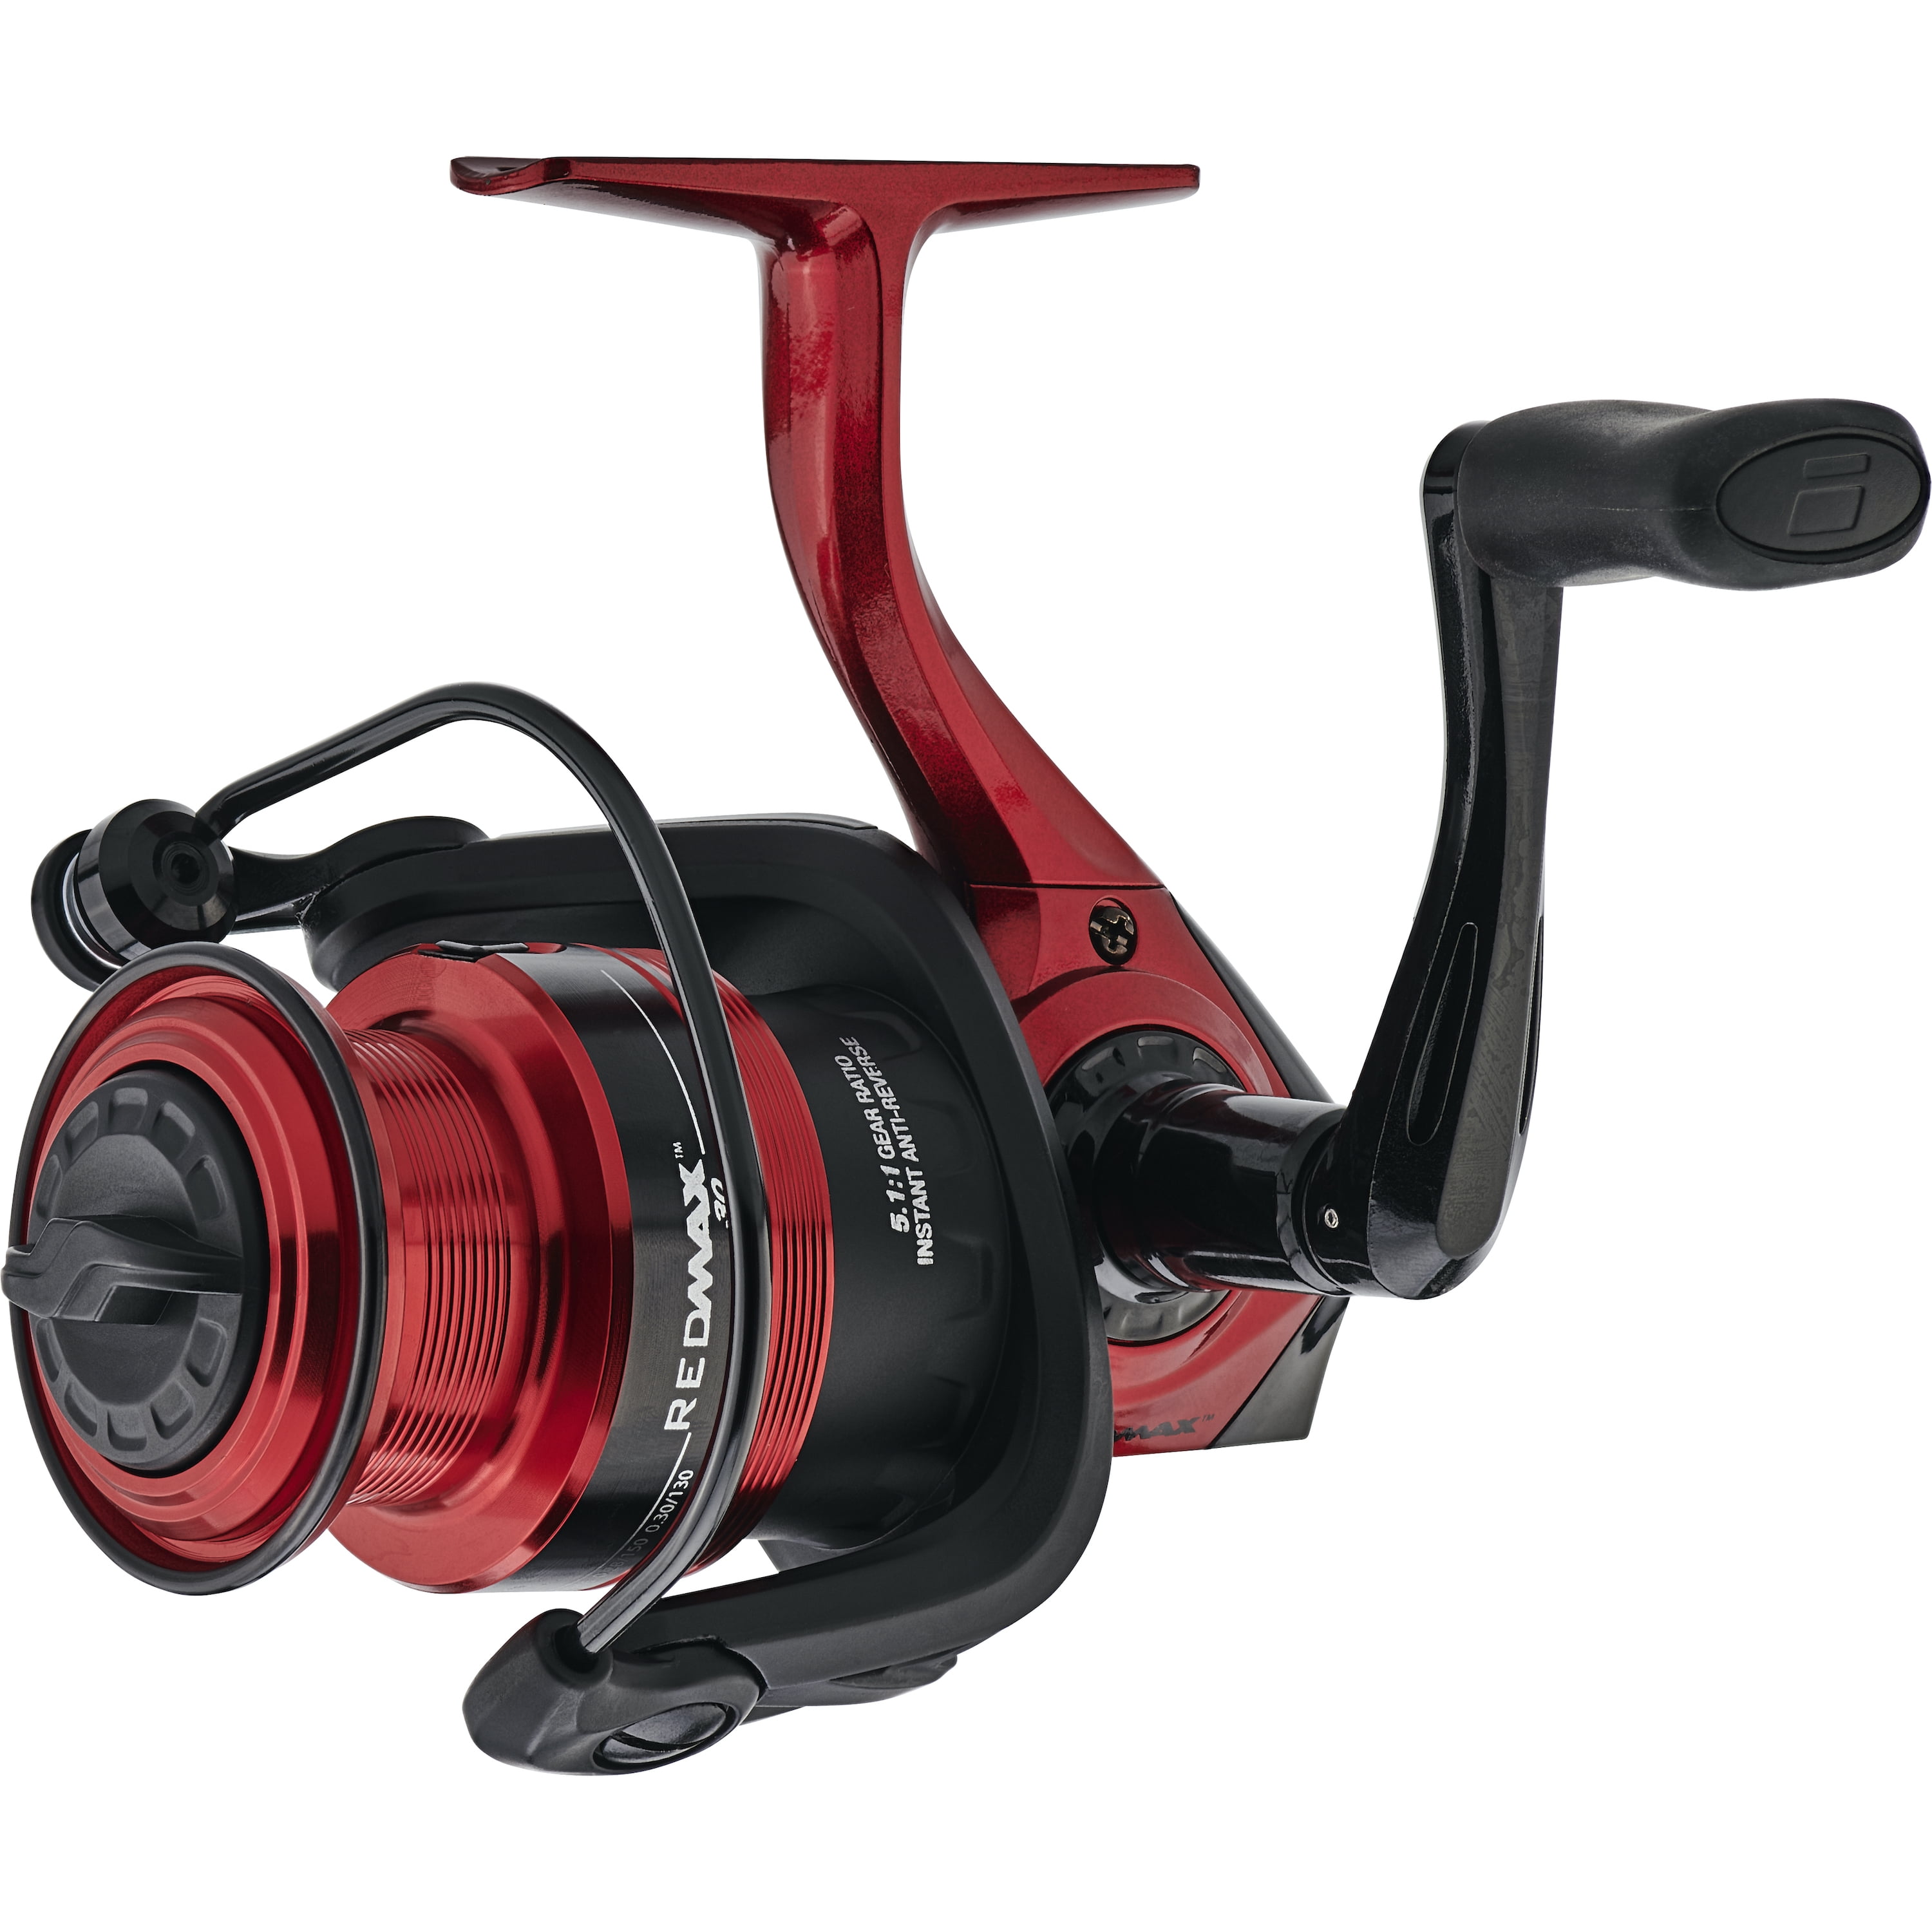 New Clam Pro Wrap Rod & Reel Tape, Red, 1 - City Market